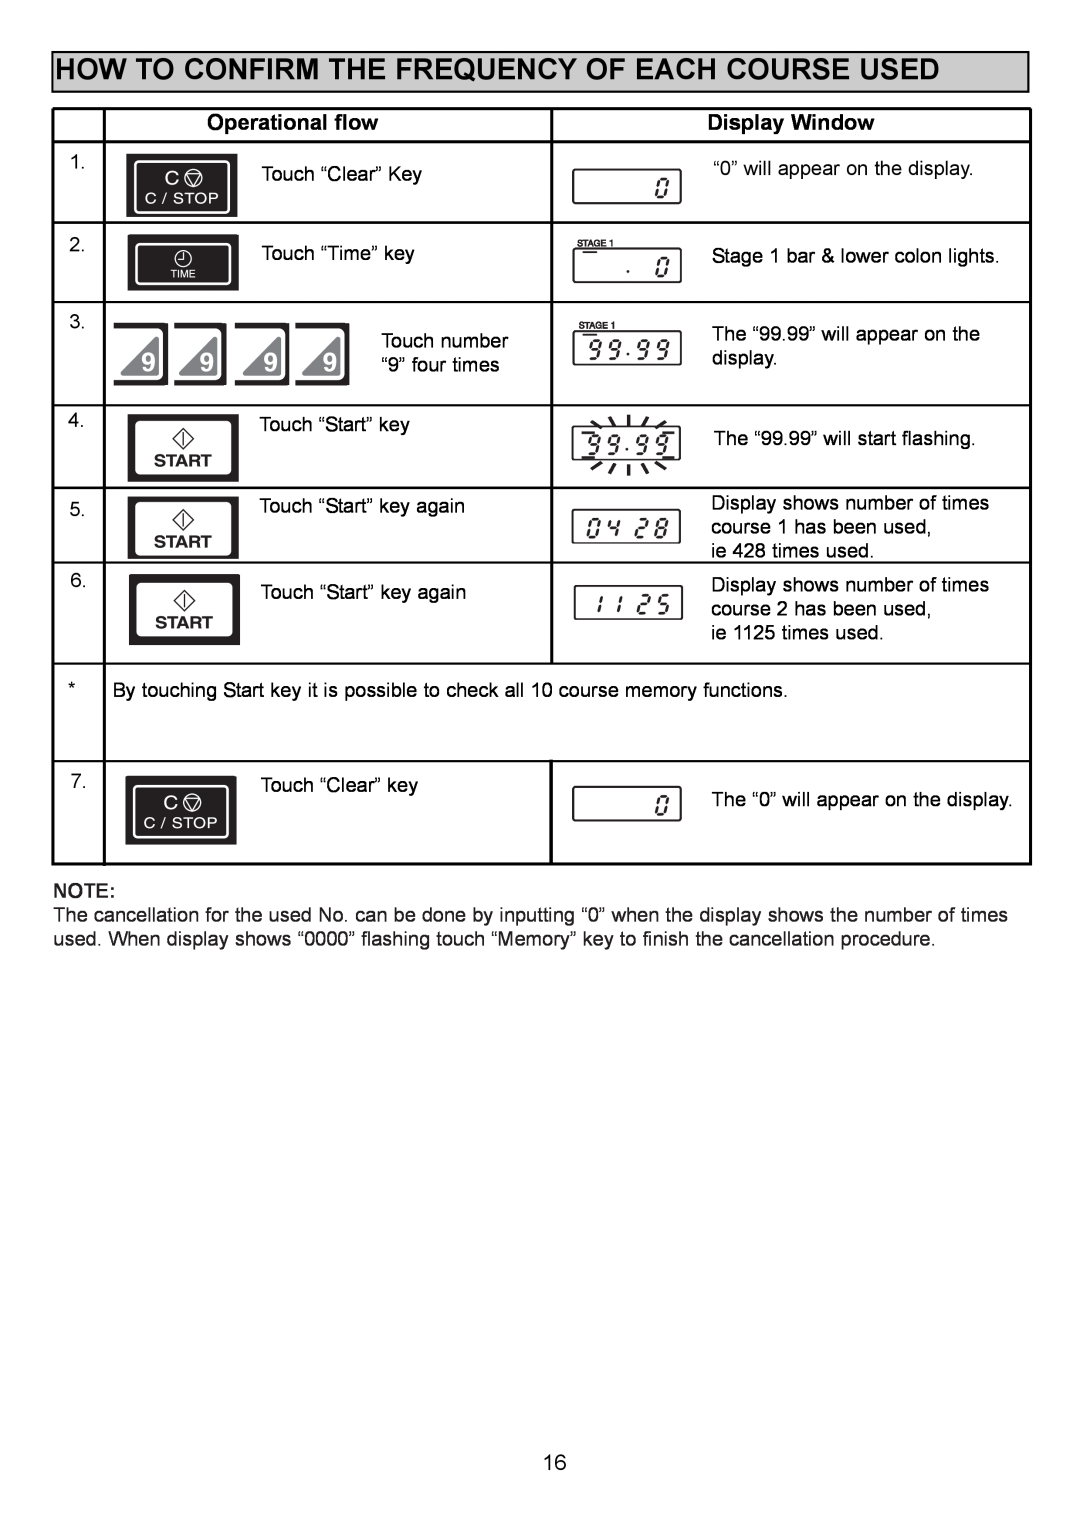 Sanyo EM-S1000 instruction manual How To Confirm The Frequency Of Each Course Used 